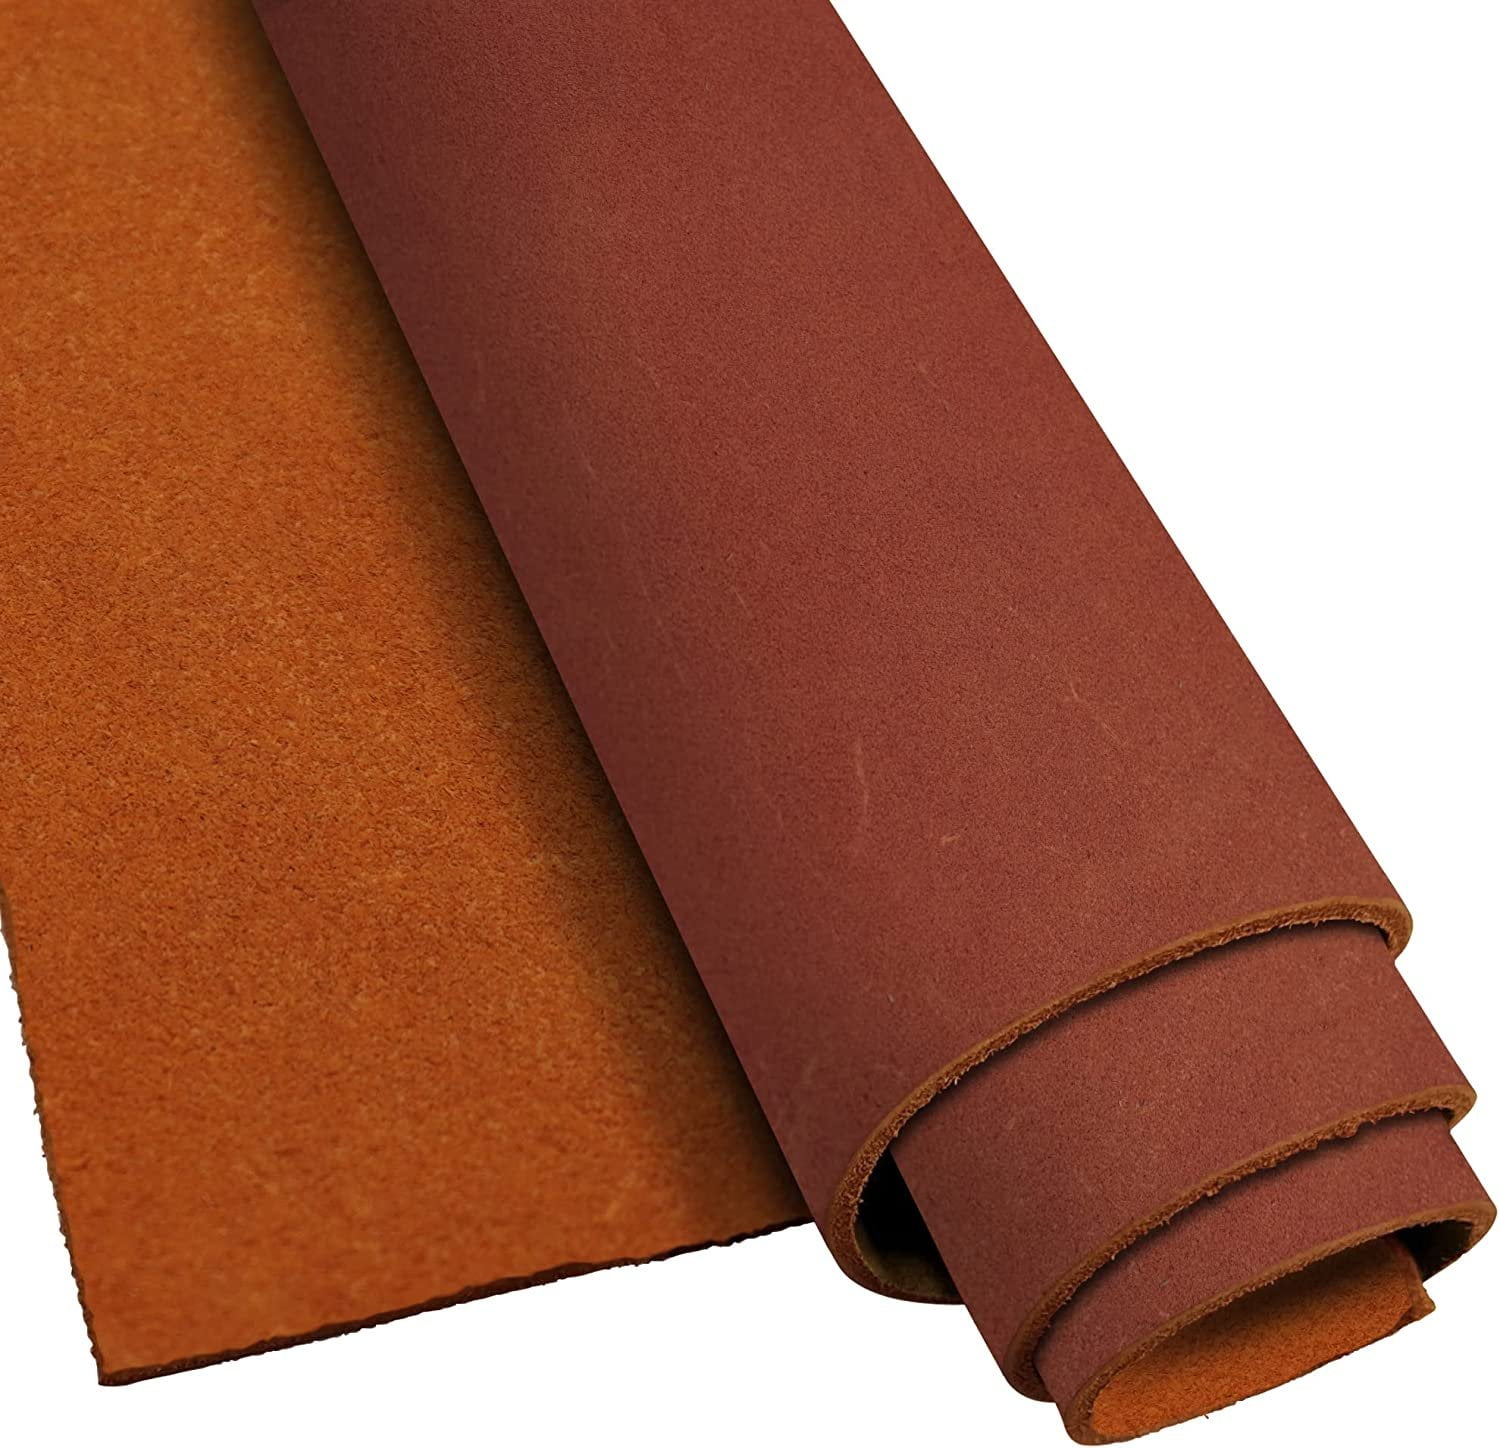 RED Smooth Leather Sheets, Leather for Crafting, Cowhide Soft Leather  Sheets, Premium Genuine Italian Leather, Italian Leather Supplies 